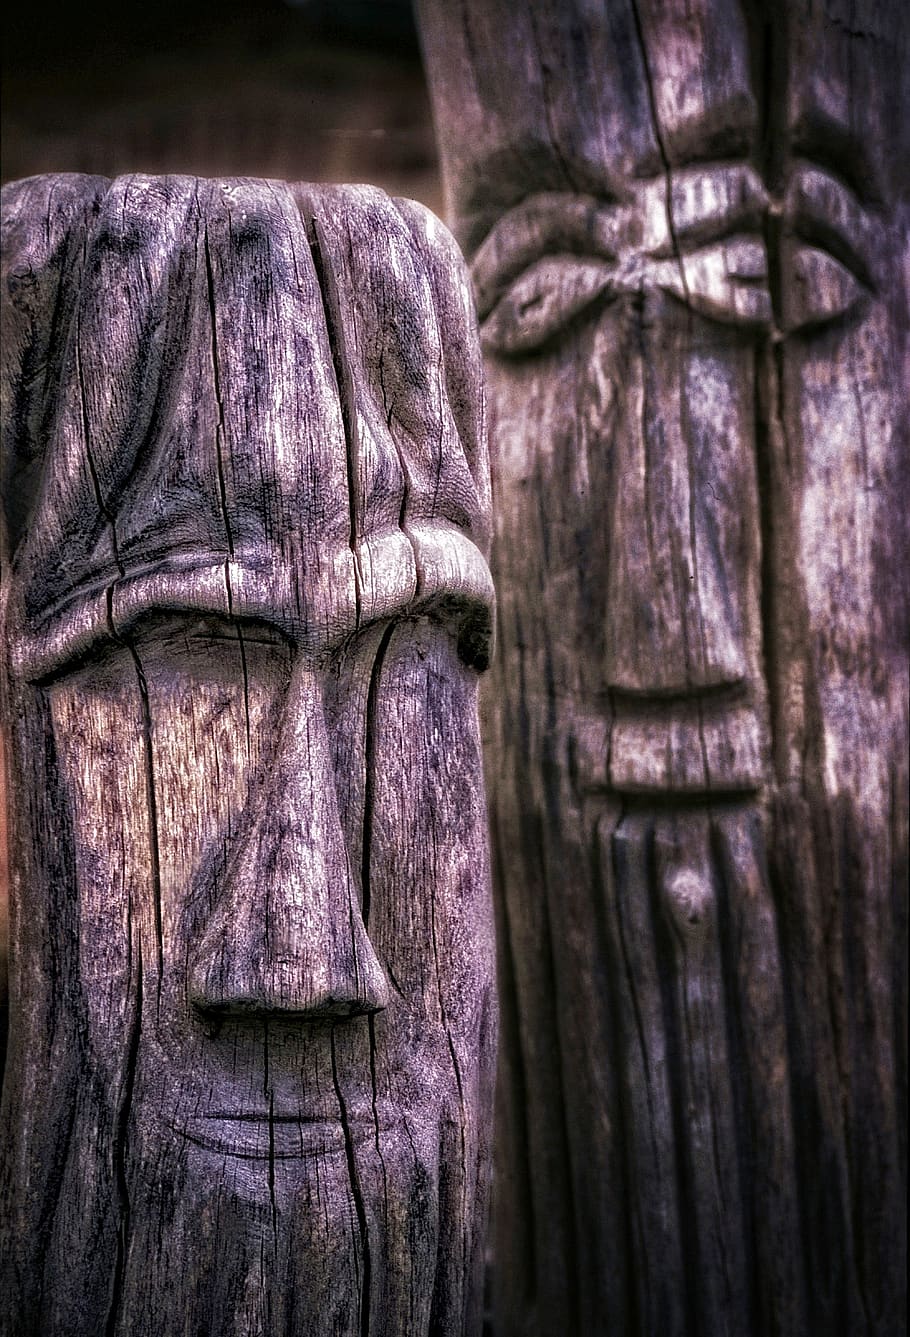 slavic gods, culture, museum, archaeological, carving, wood, tribe, faces, weird, old